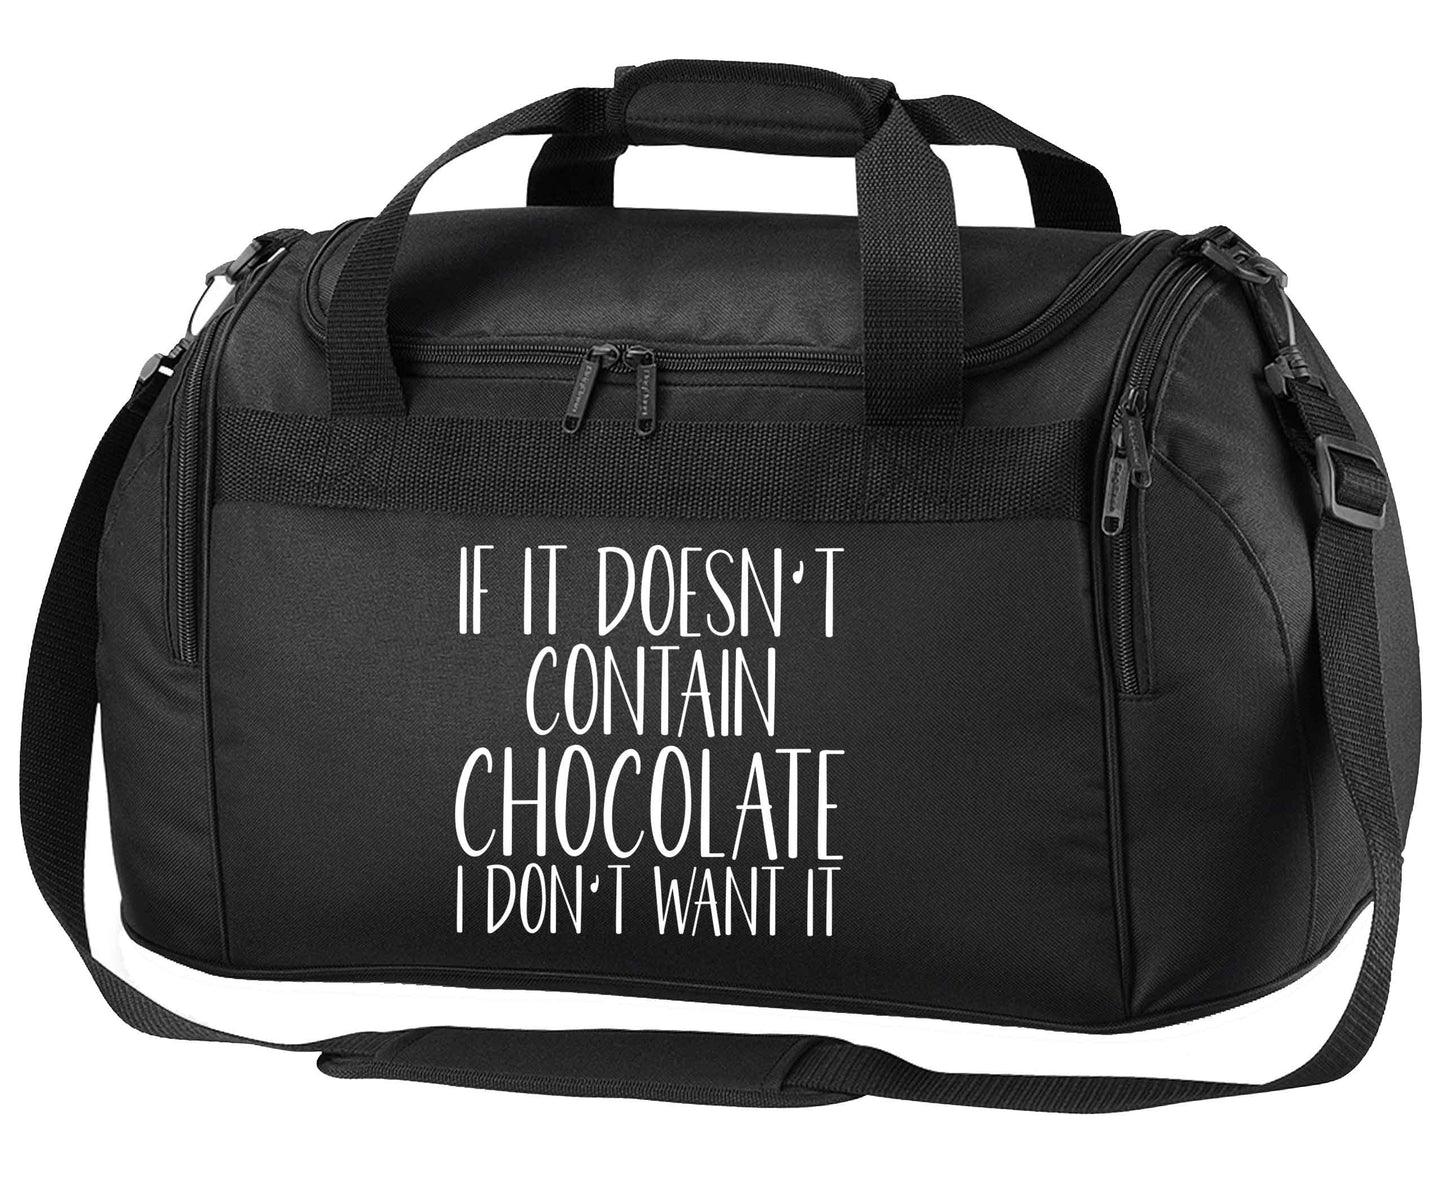 If it doesn't contain chocolate I don't want it black holdall / duffel bag